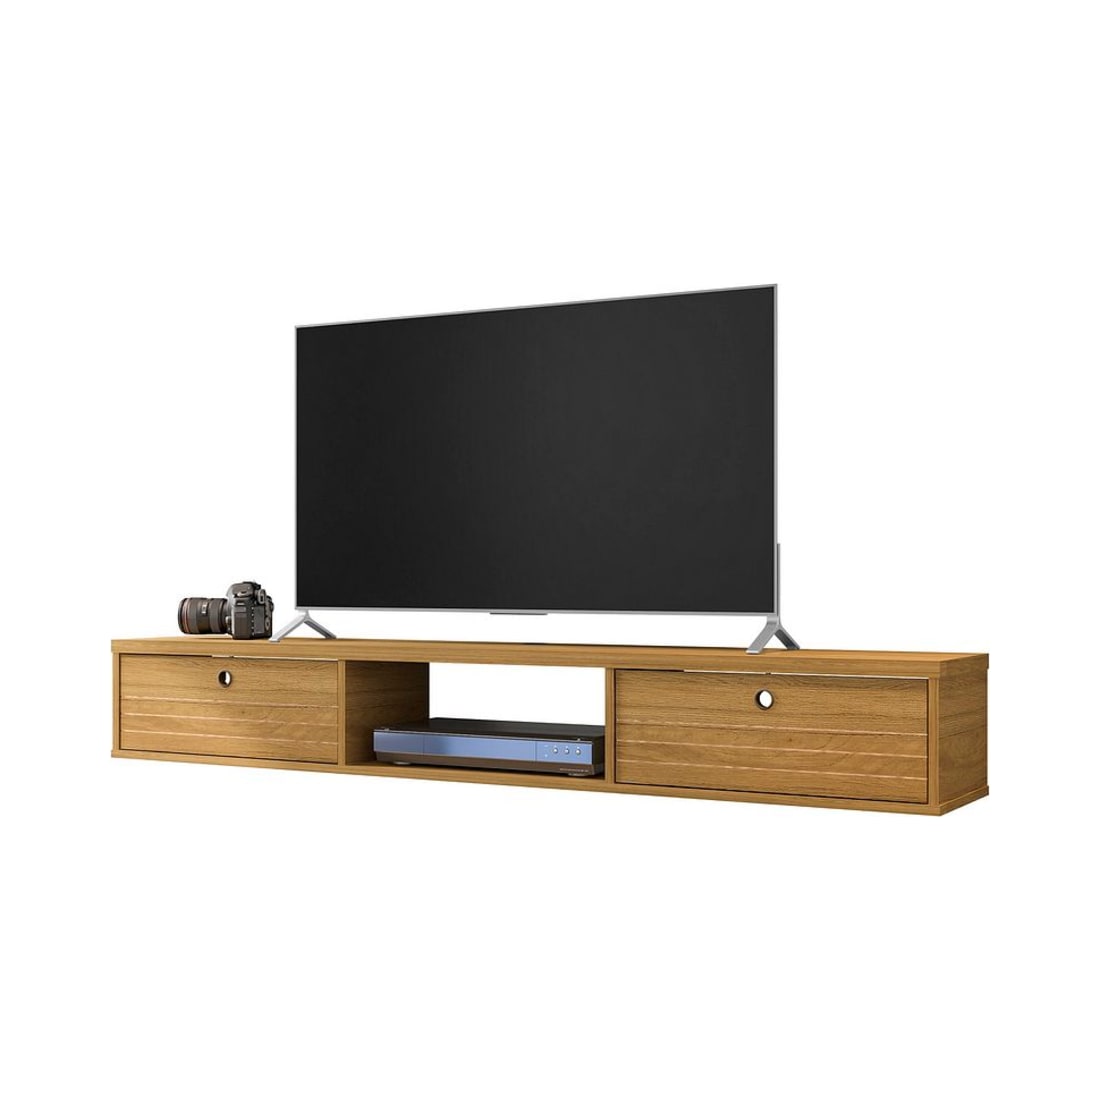 Liberty 62.99” Floating Entertainment Center in Cinnamon